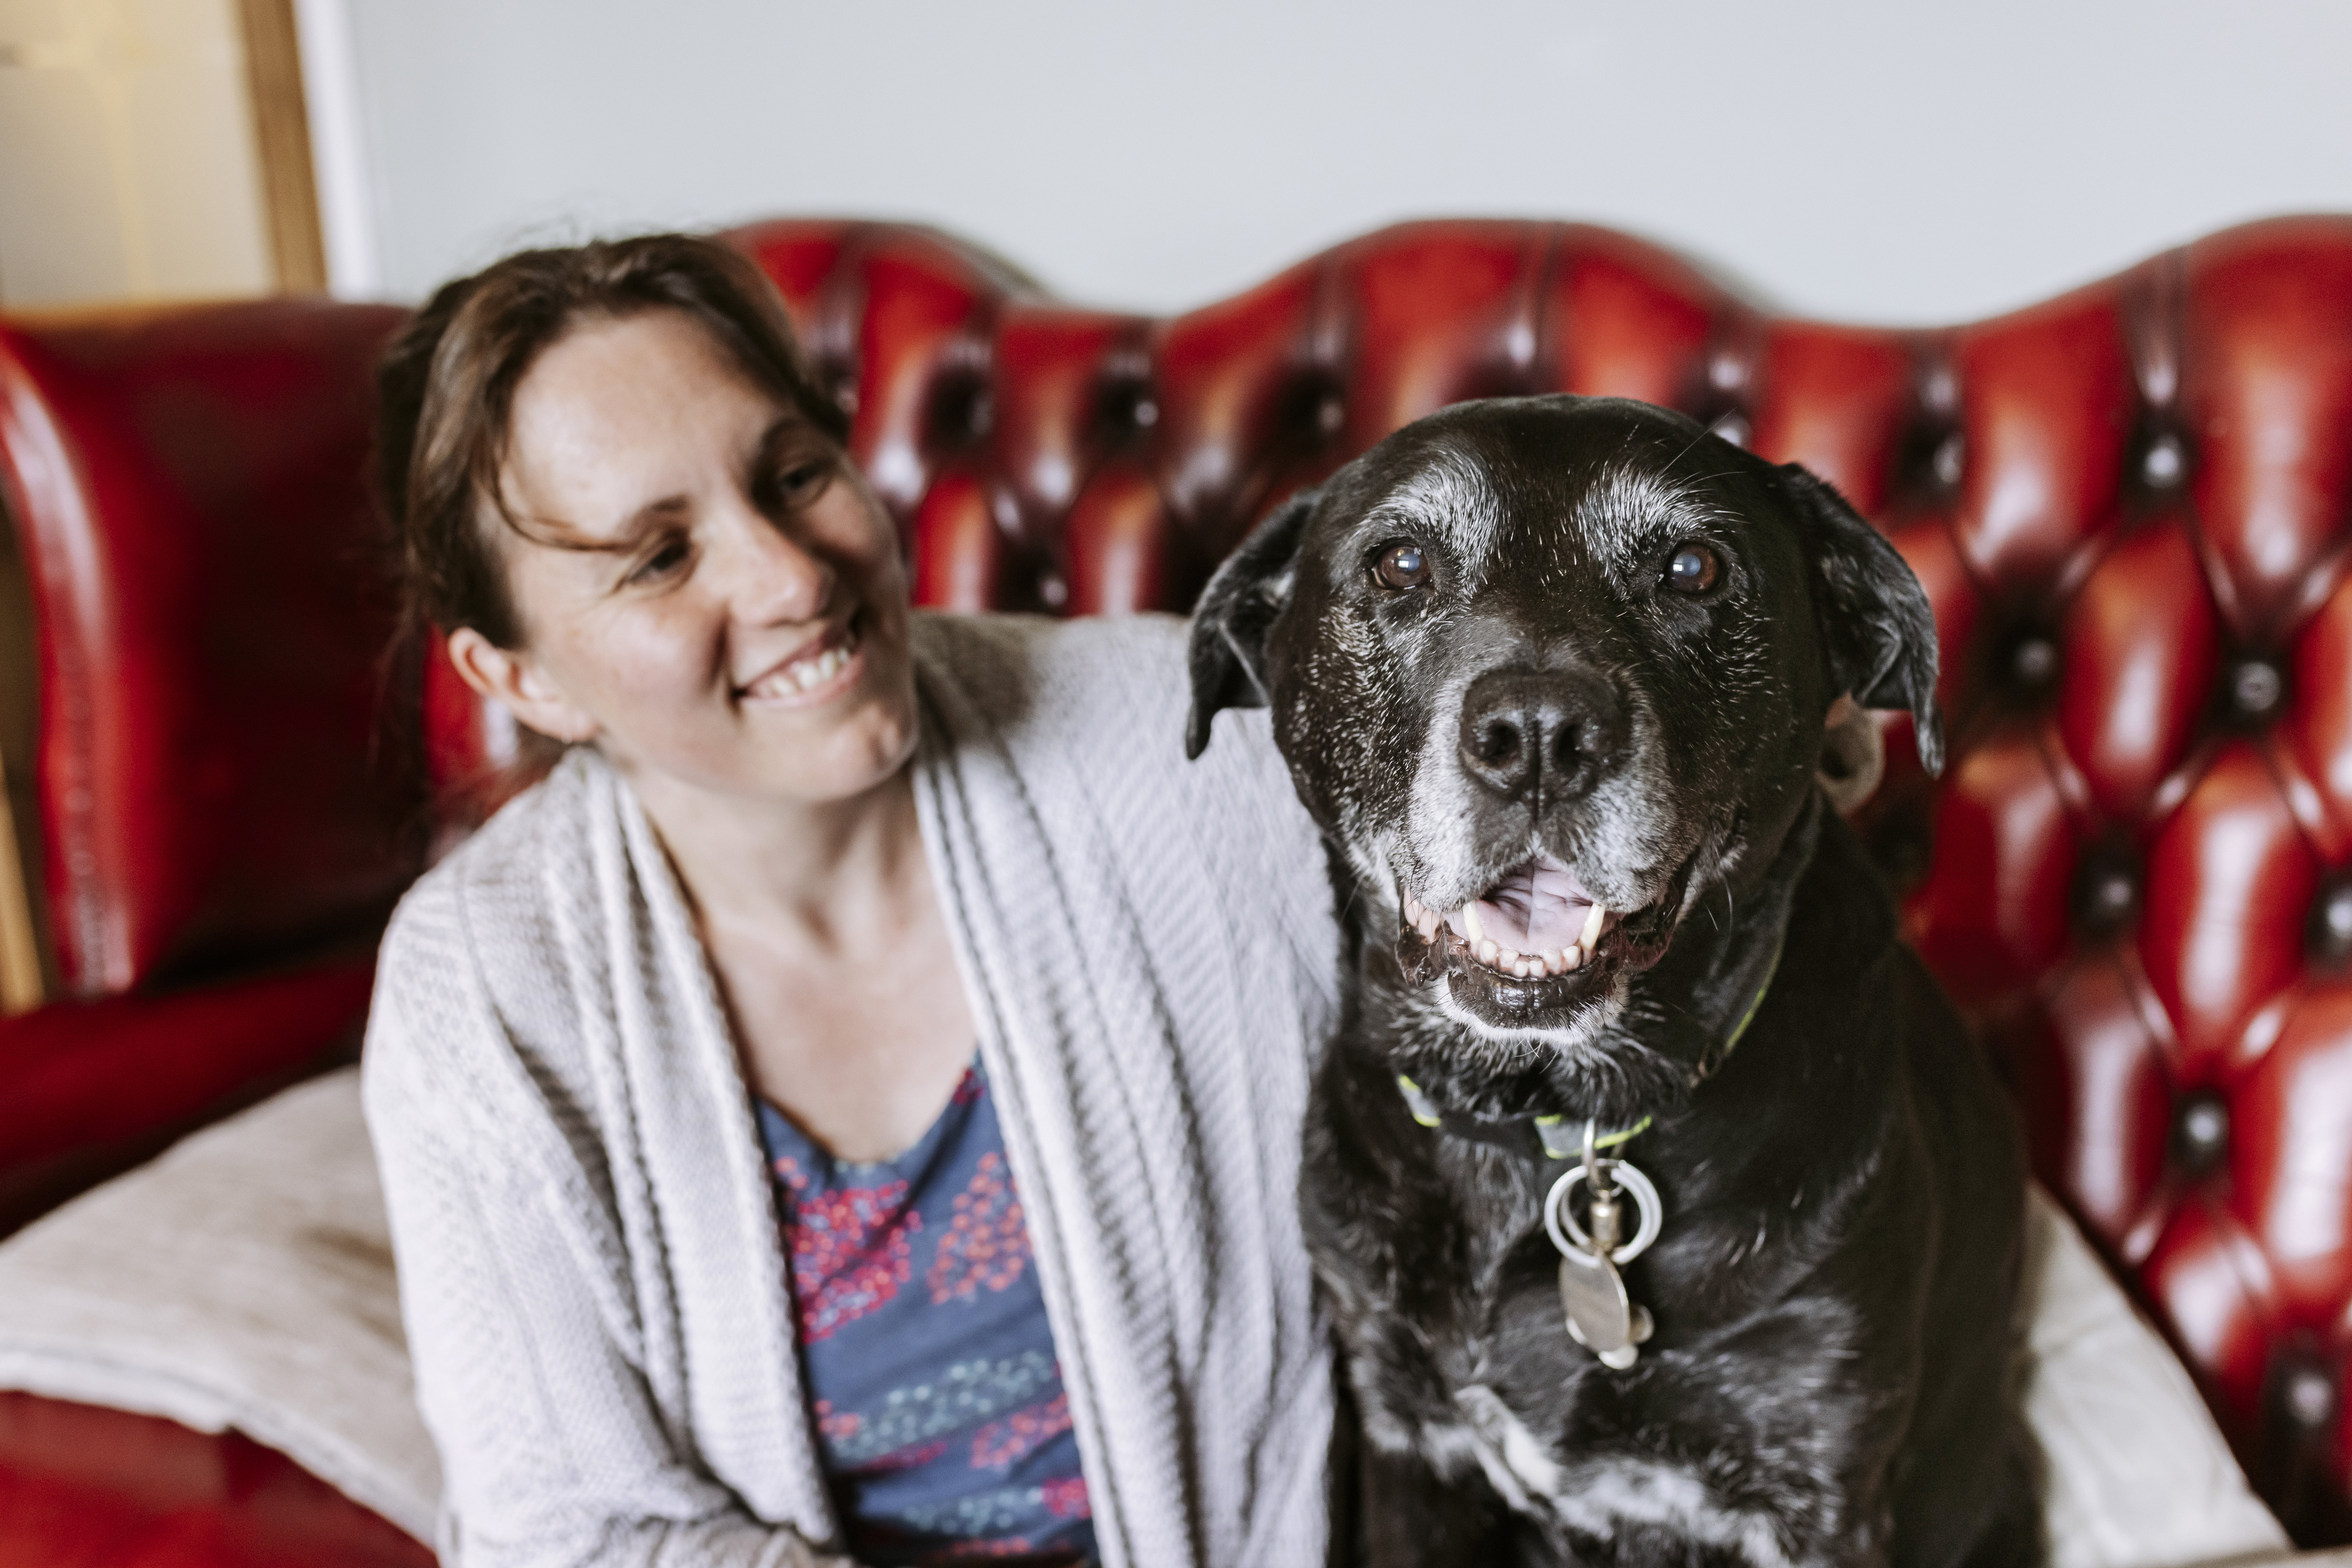 A black and white labrador cross gazes into the camera as her smiling owner wraps an arm around her